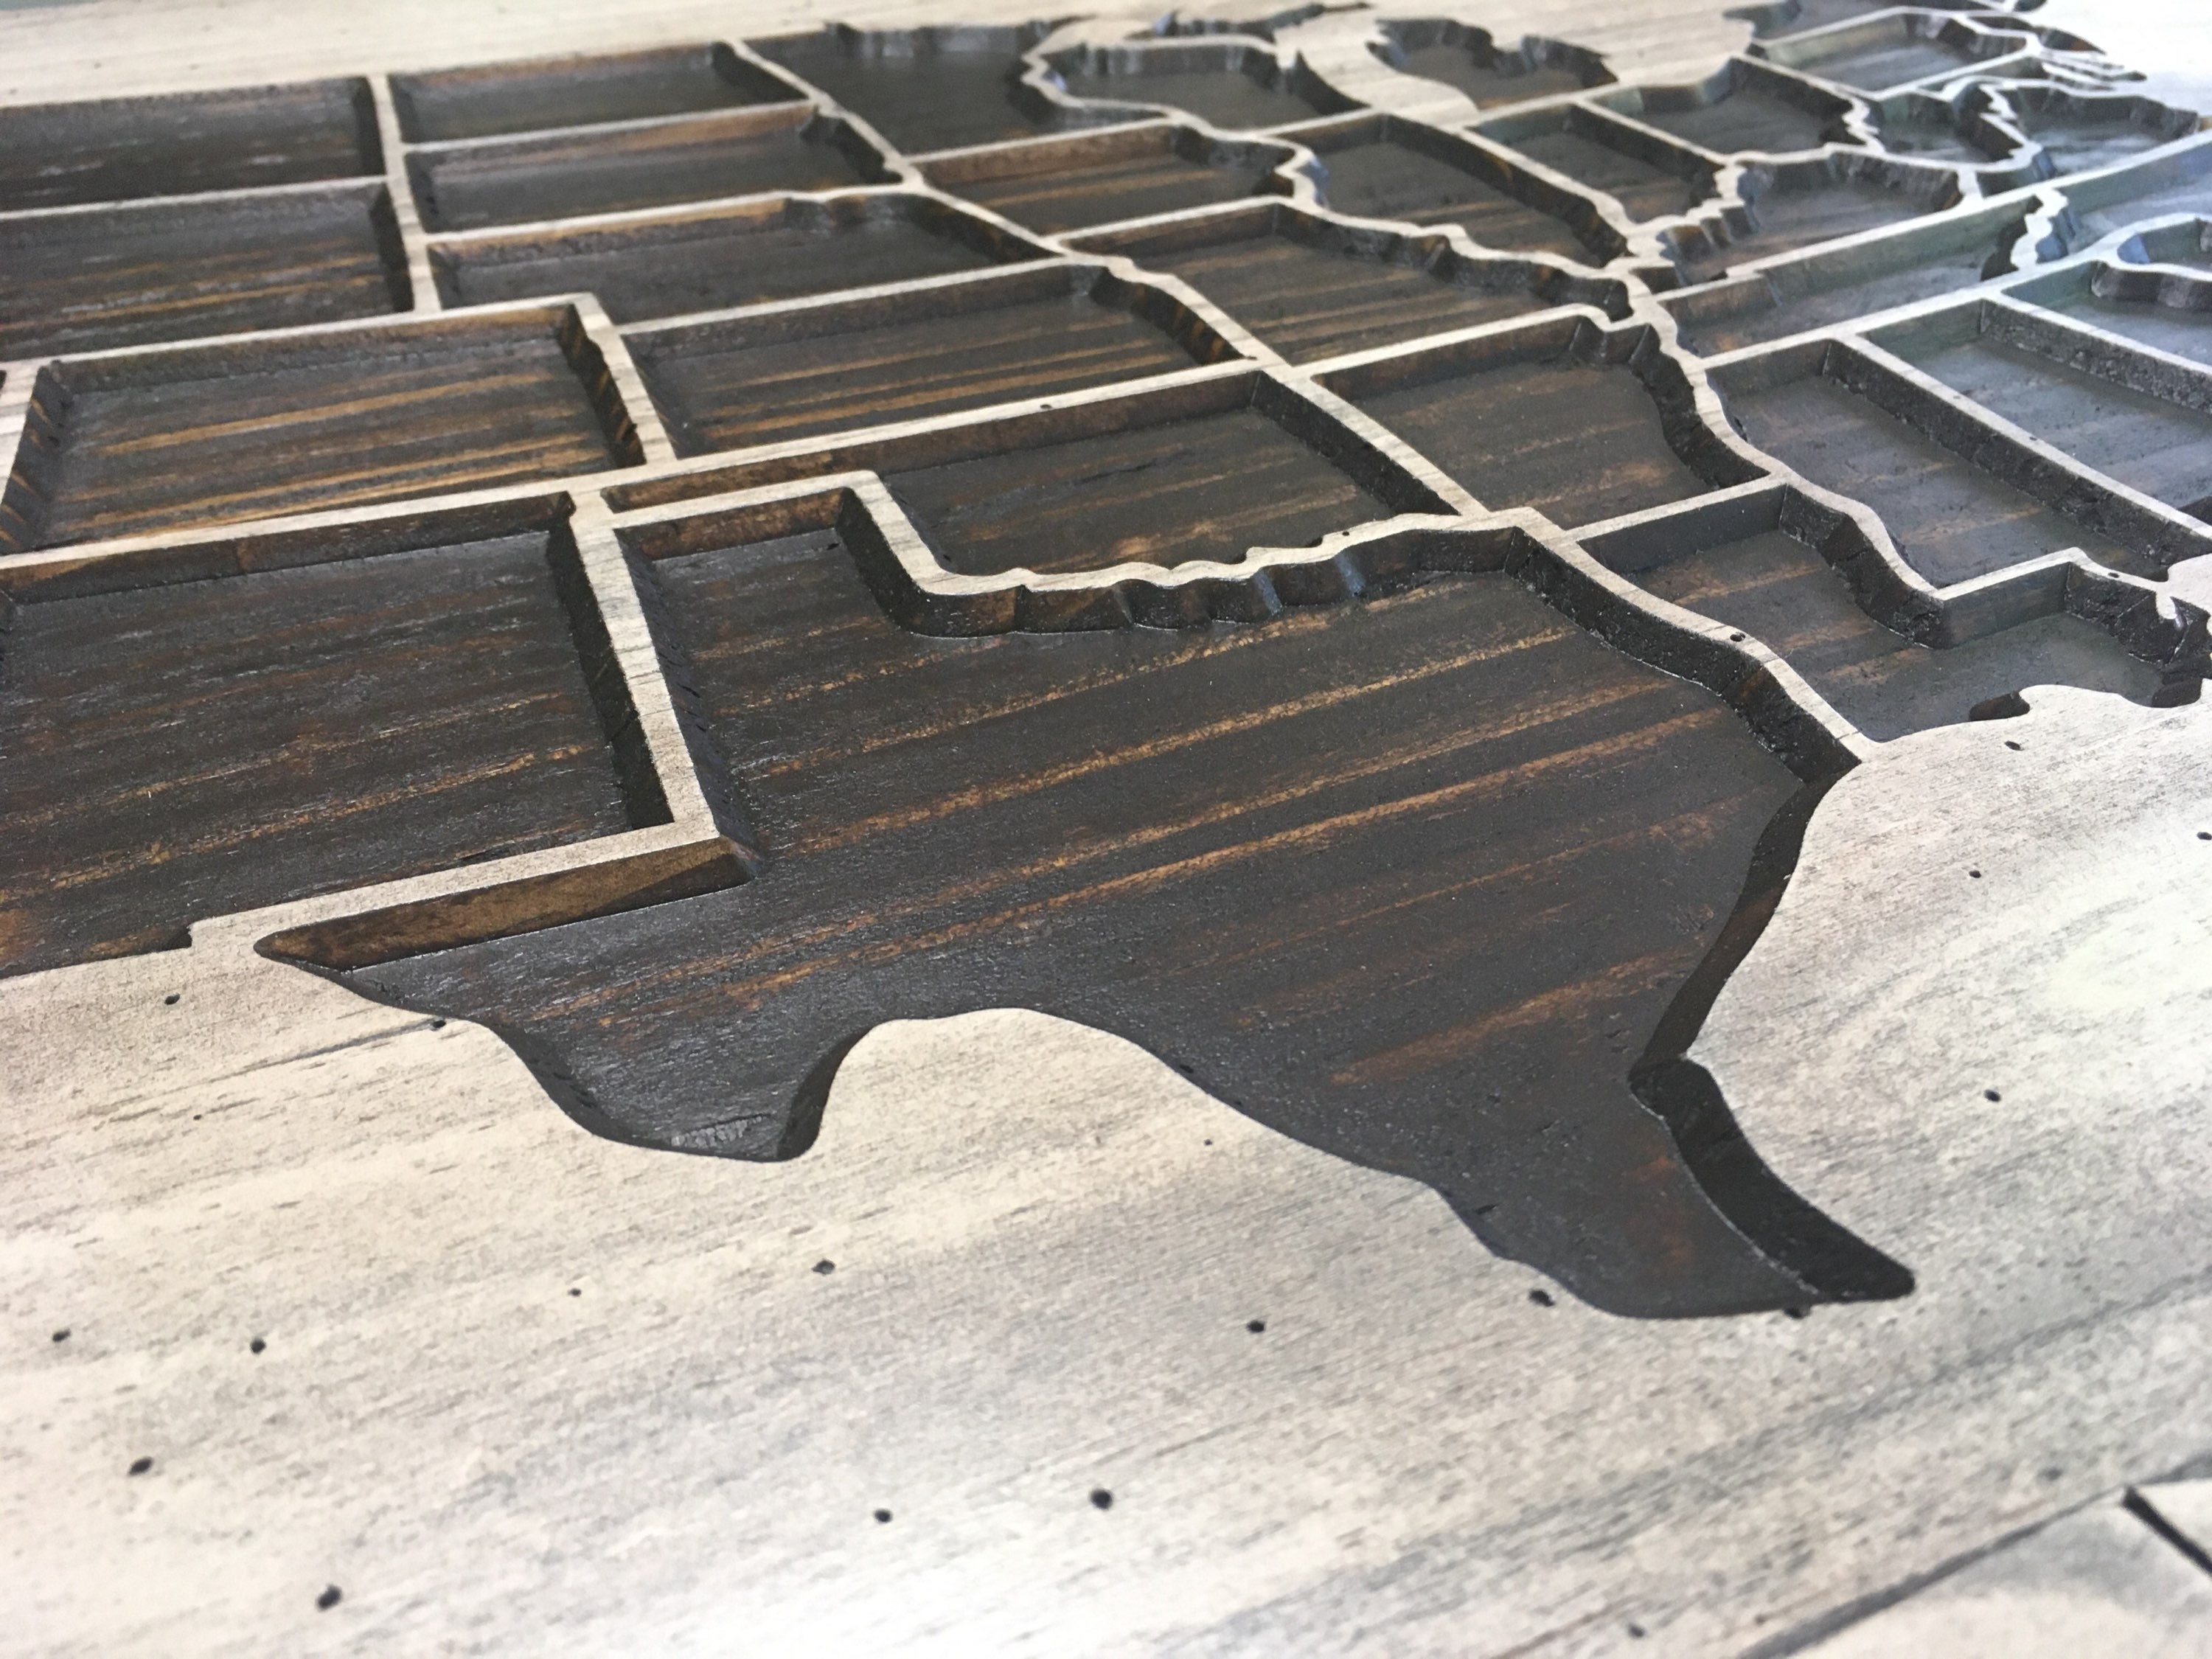 Wood Carved Map Of The United States, Adventure Awaits, Wanderlust, Push Pin Travel Idea For Home Or Office, Unique Bridal Shower Gift